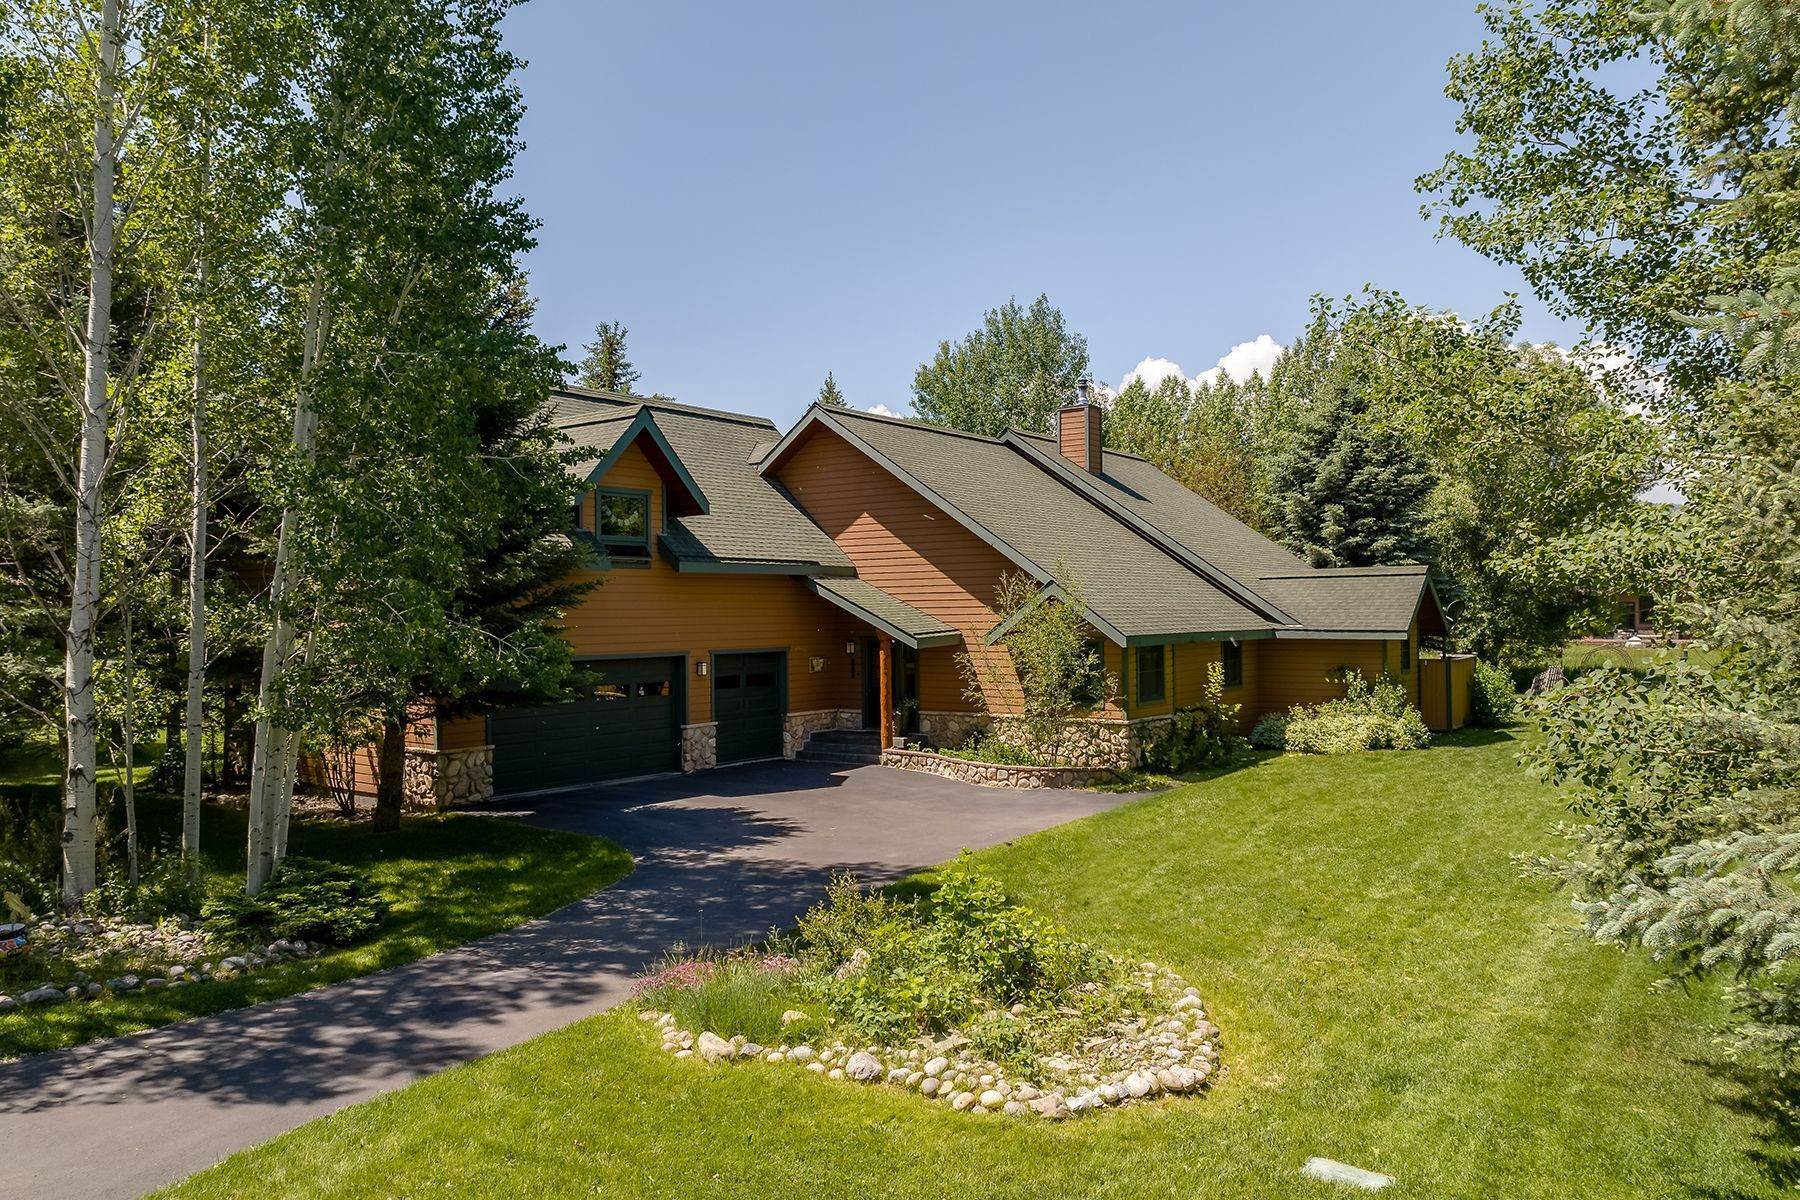 Single Family Homes for Sale at South Fallen Leaf Lane 4245 S Fallen Leaf Lane Jackson, Wyoming 83001 United States